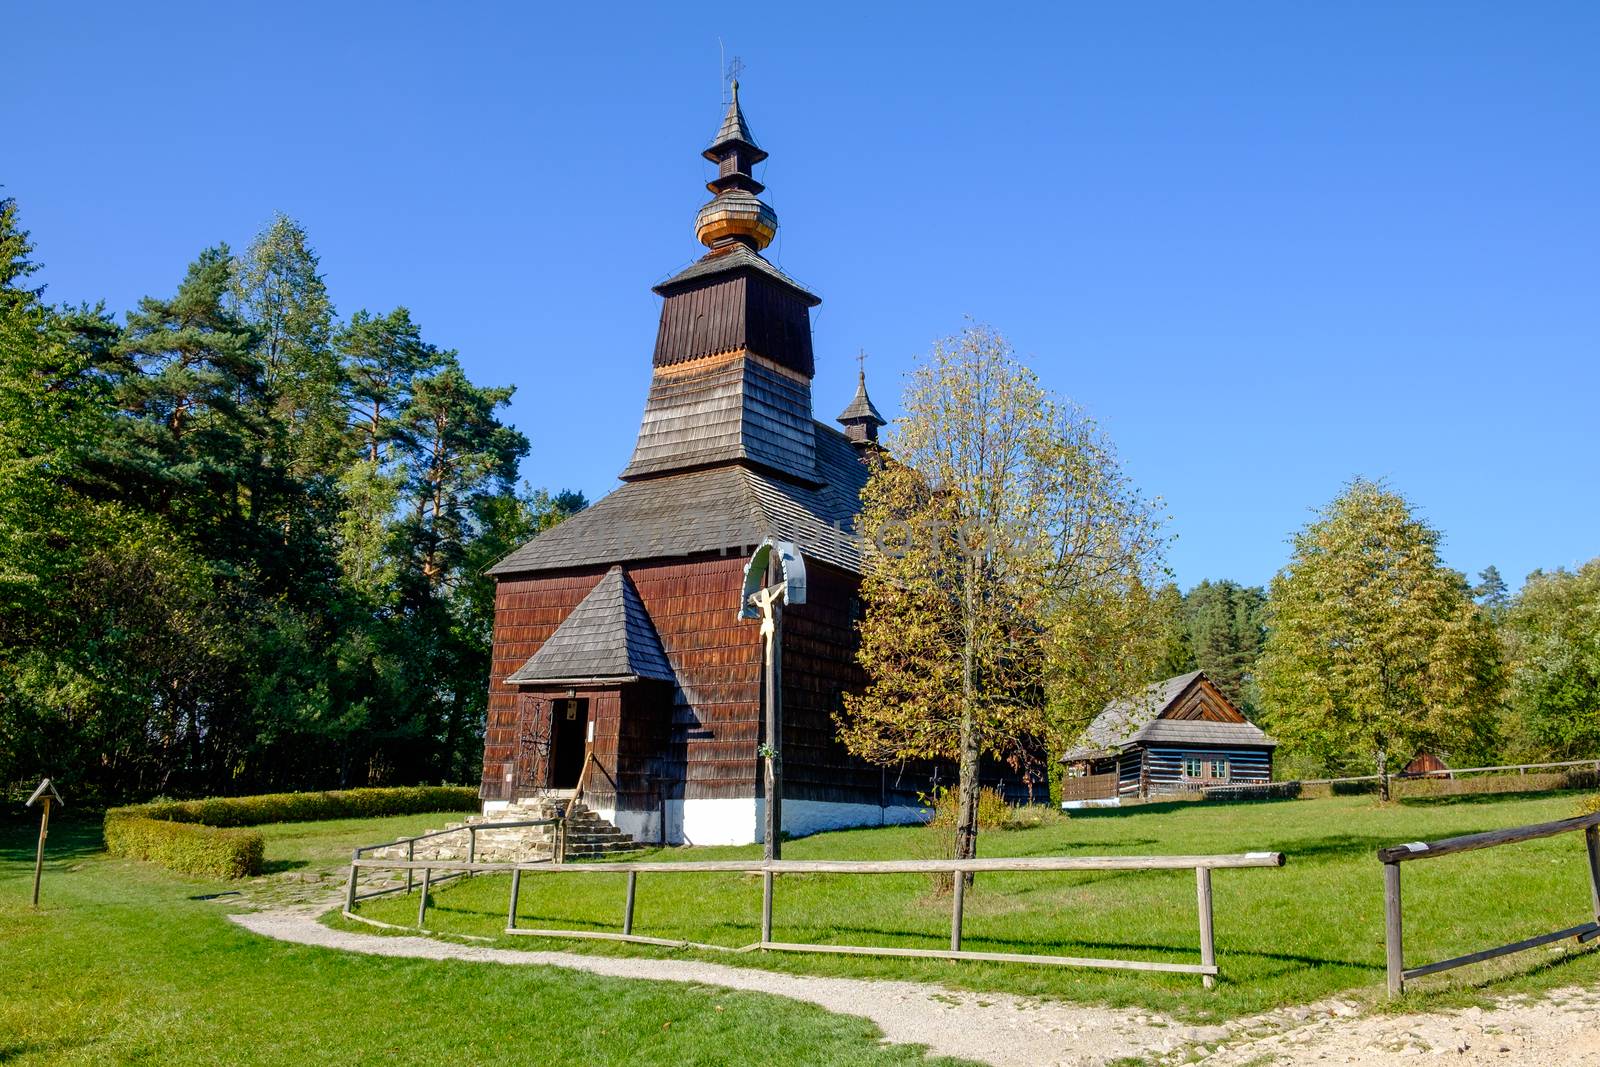 Old traditional Slovak wooden church, Stara Lubovna, Slovakia by martinm303